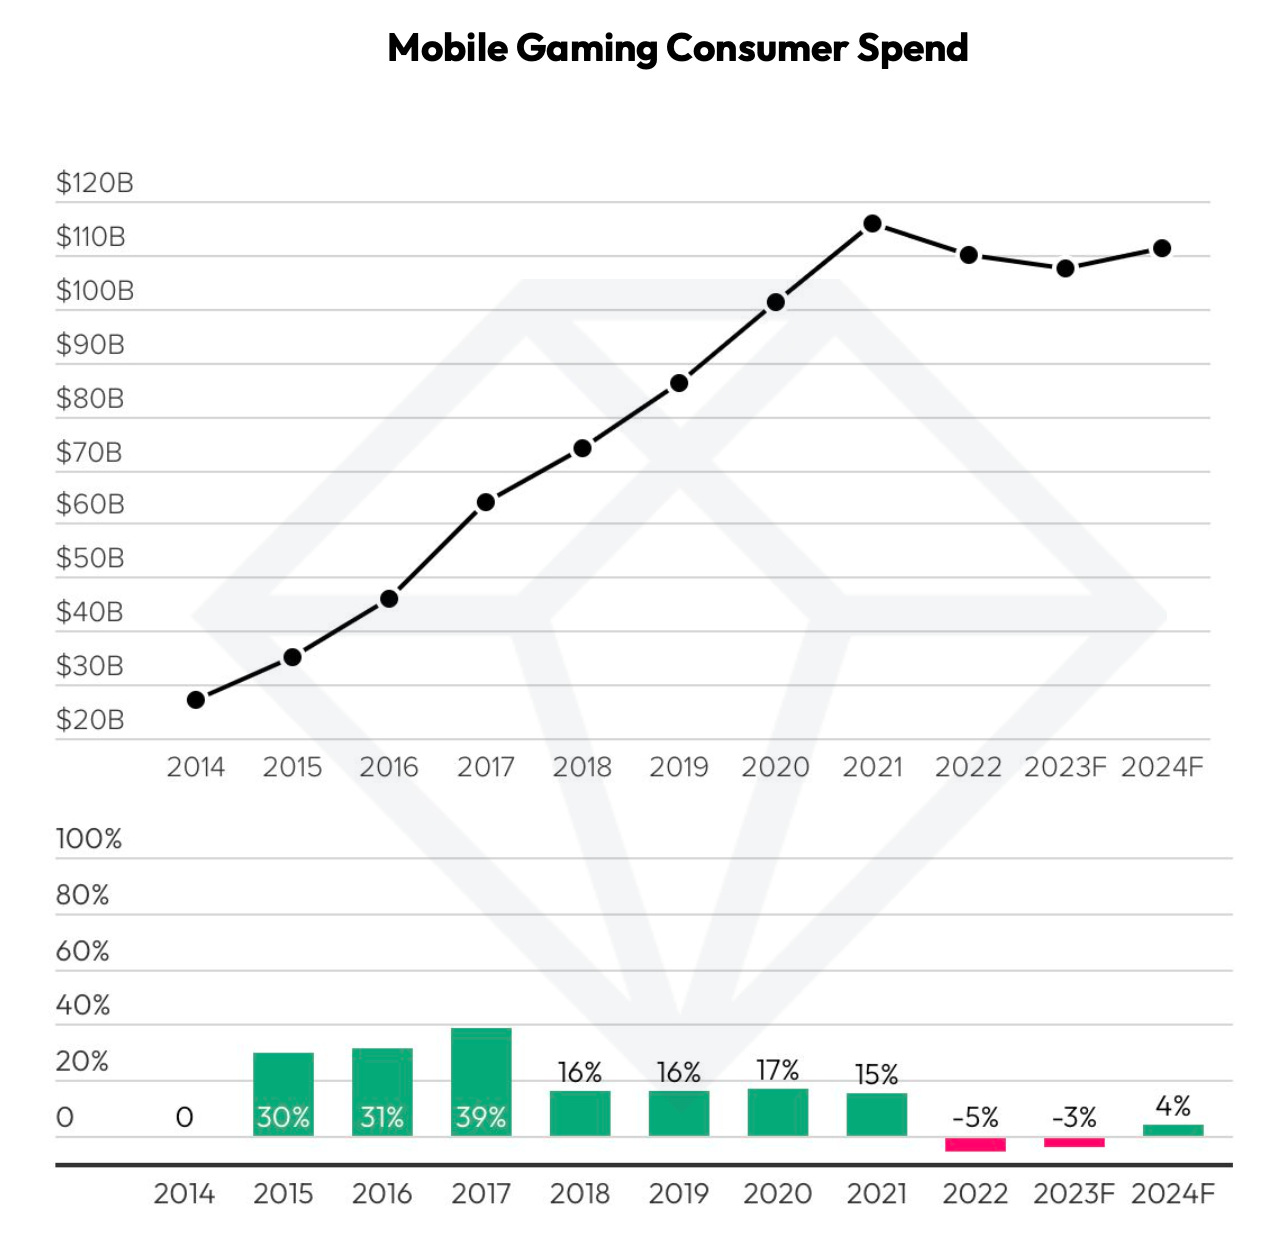 Mobile gaming consumer spend 2024